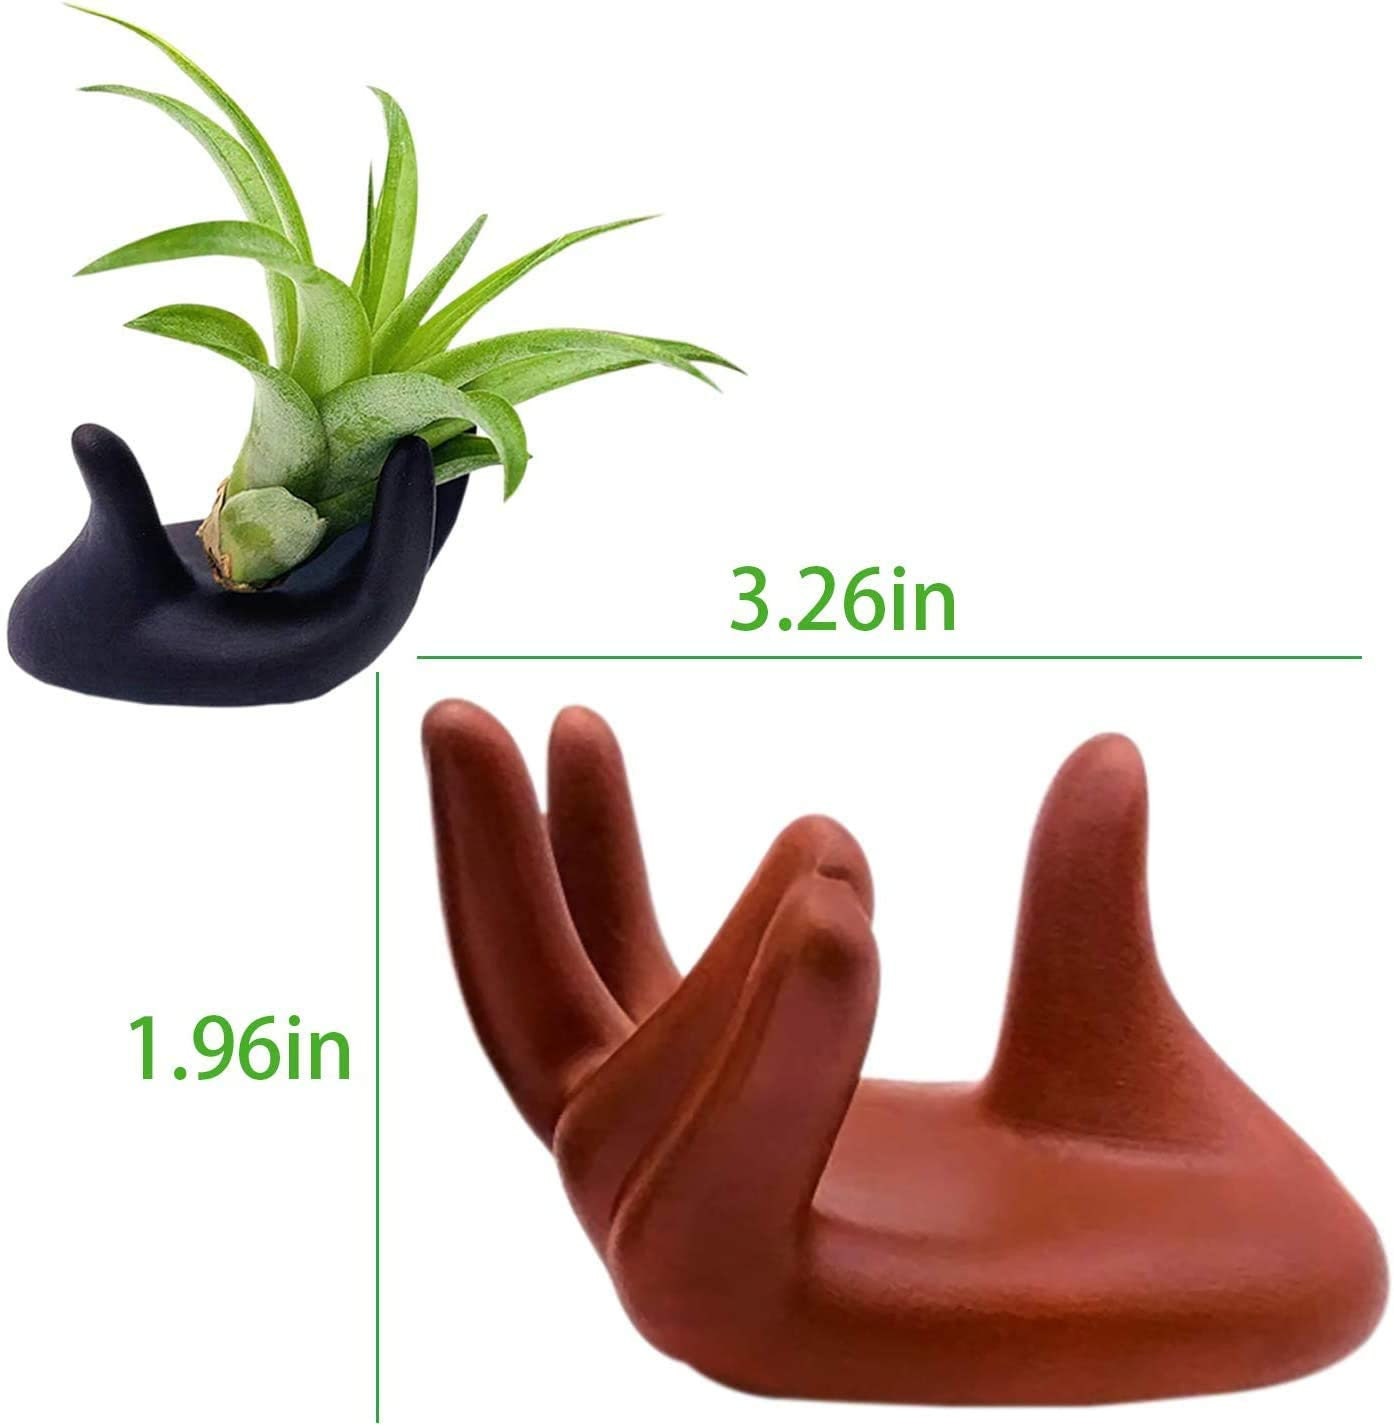 Ceramic Hand Air Plant Pot Display - Hand Stand Container Home Bedroom Office or Plant Garden Decor Decoration Fun & Functional